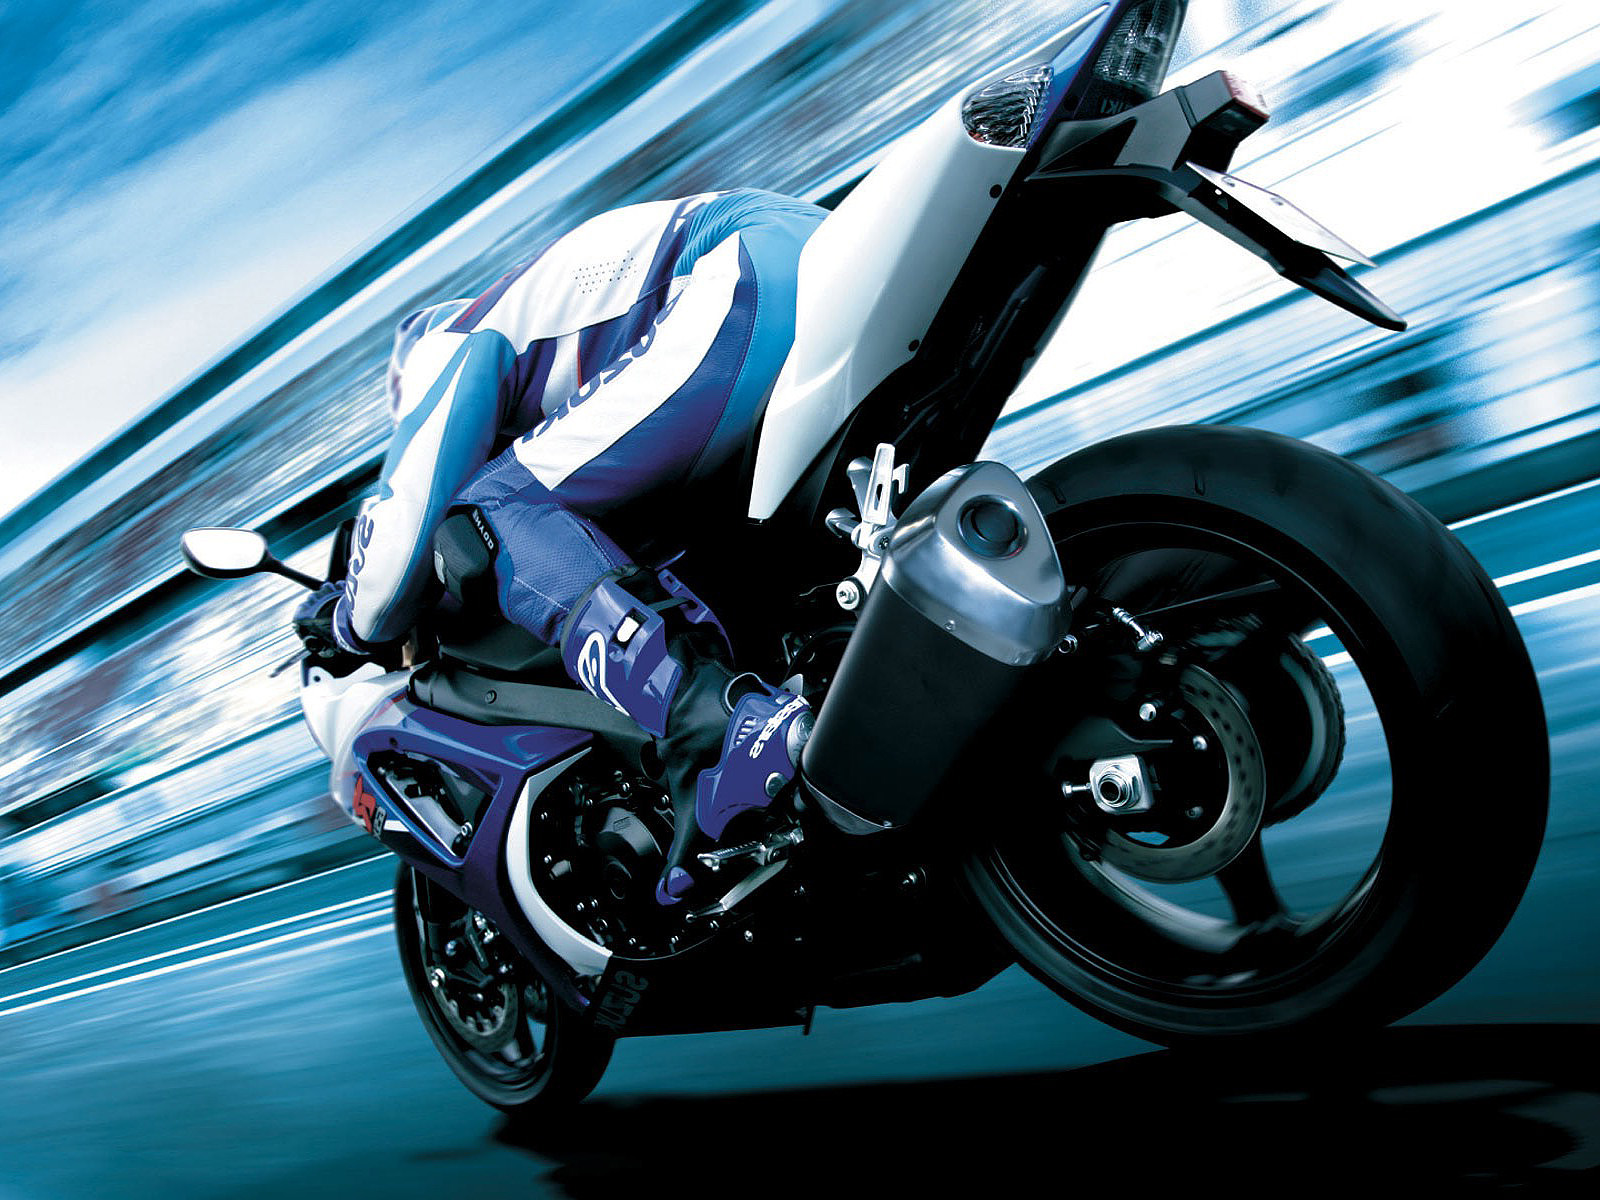 Motorcycles Wallpapers Hd Beautiful Motorcycle Wallpaper And Pictures